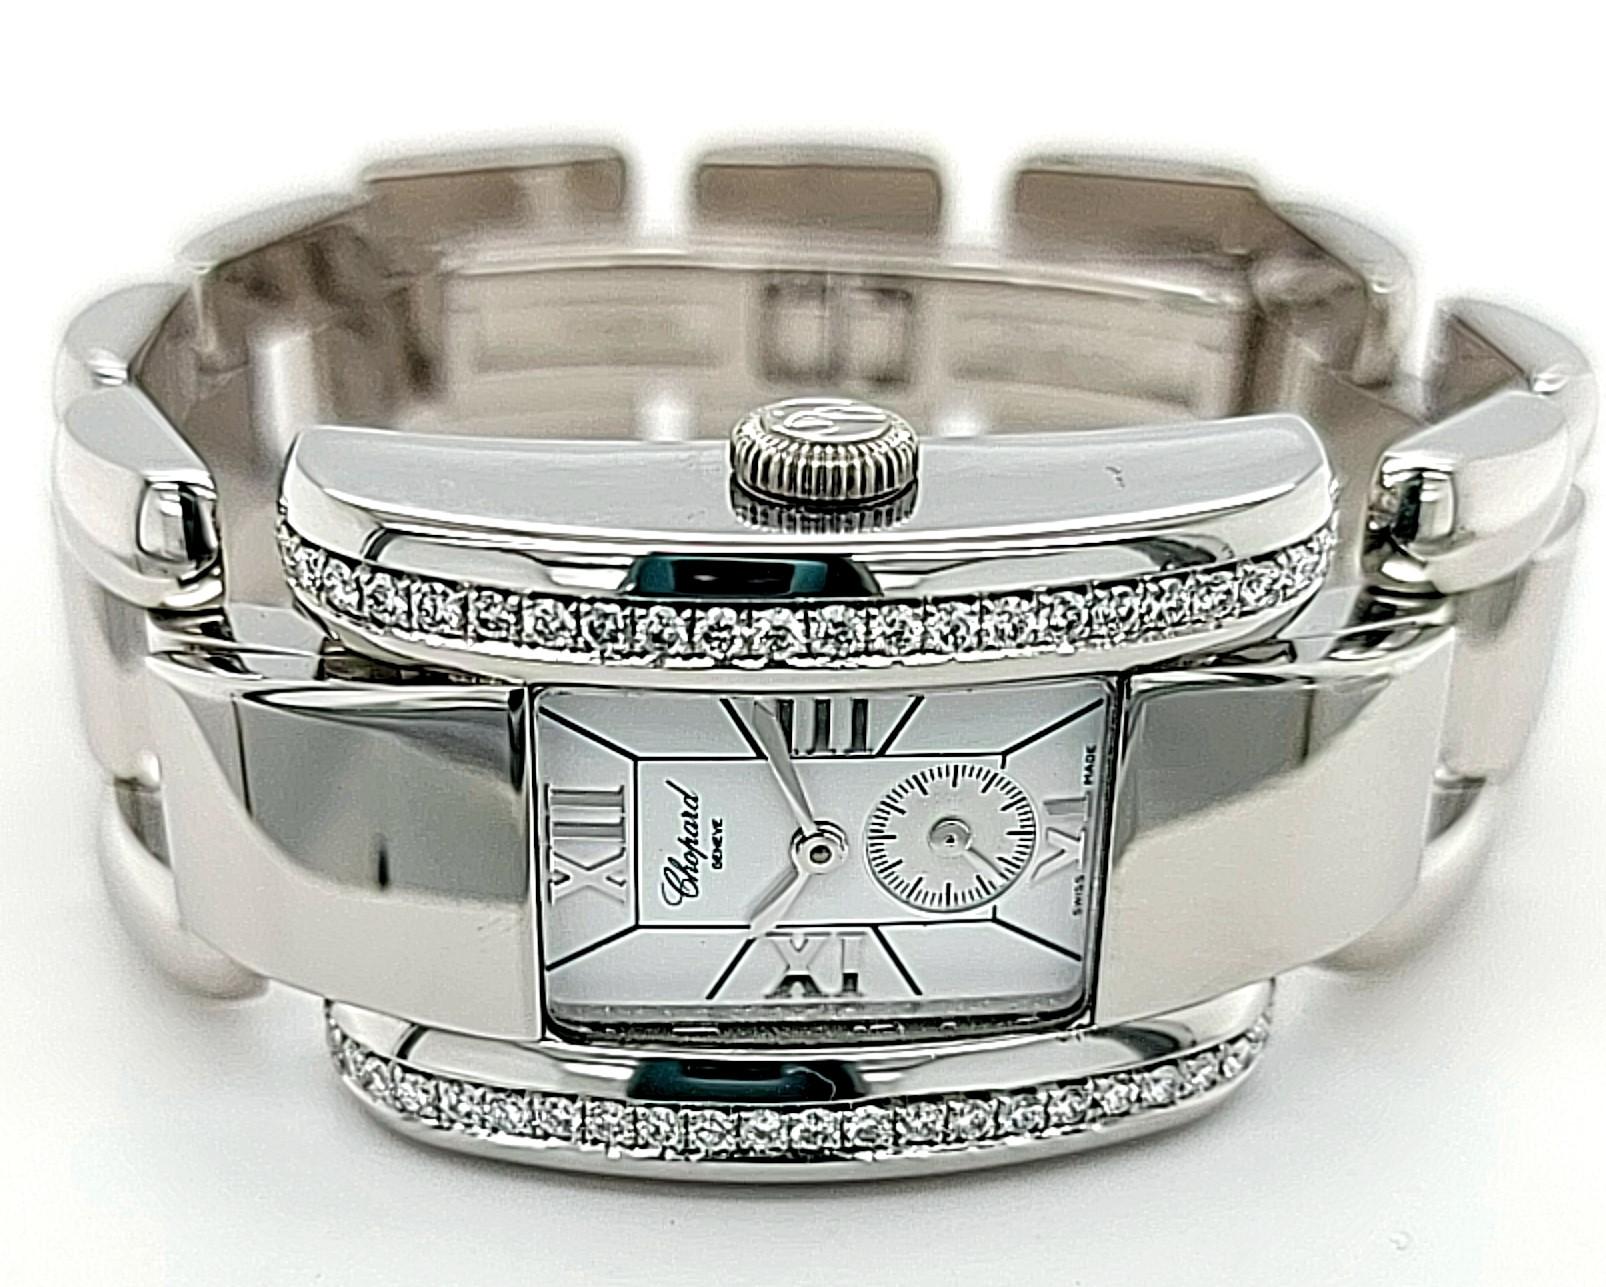 Chopard La Strada Ladies in Steel with Partial Diamond on Bezel In Excellent Condition For Sale In Antwerp, BE